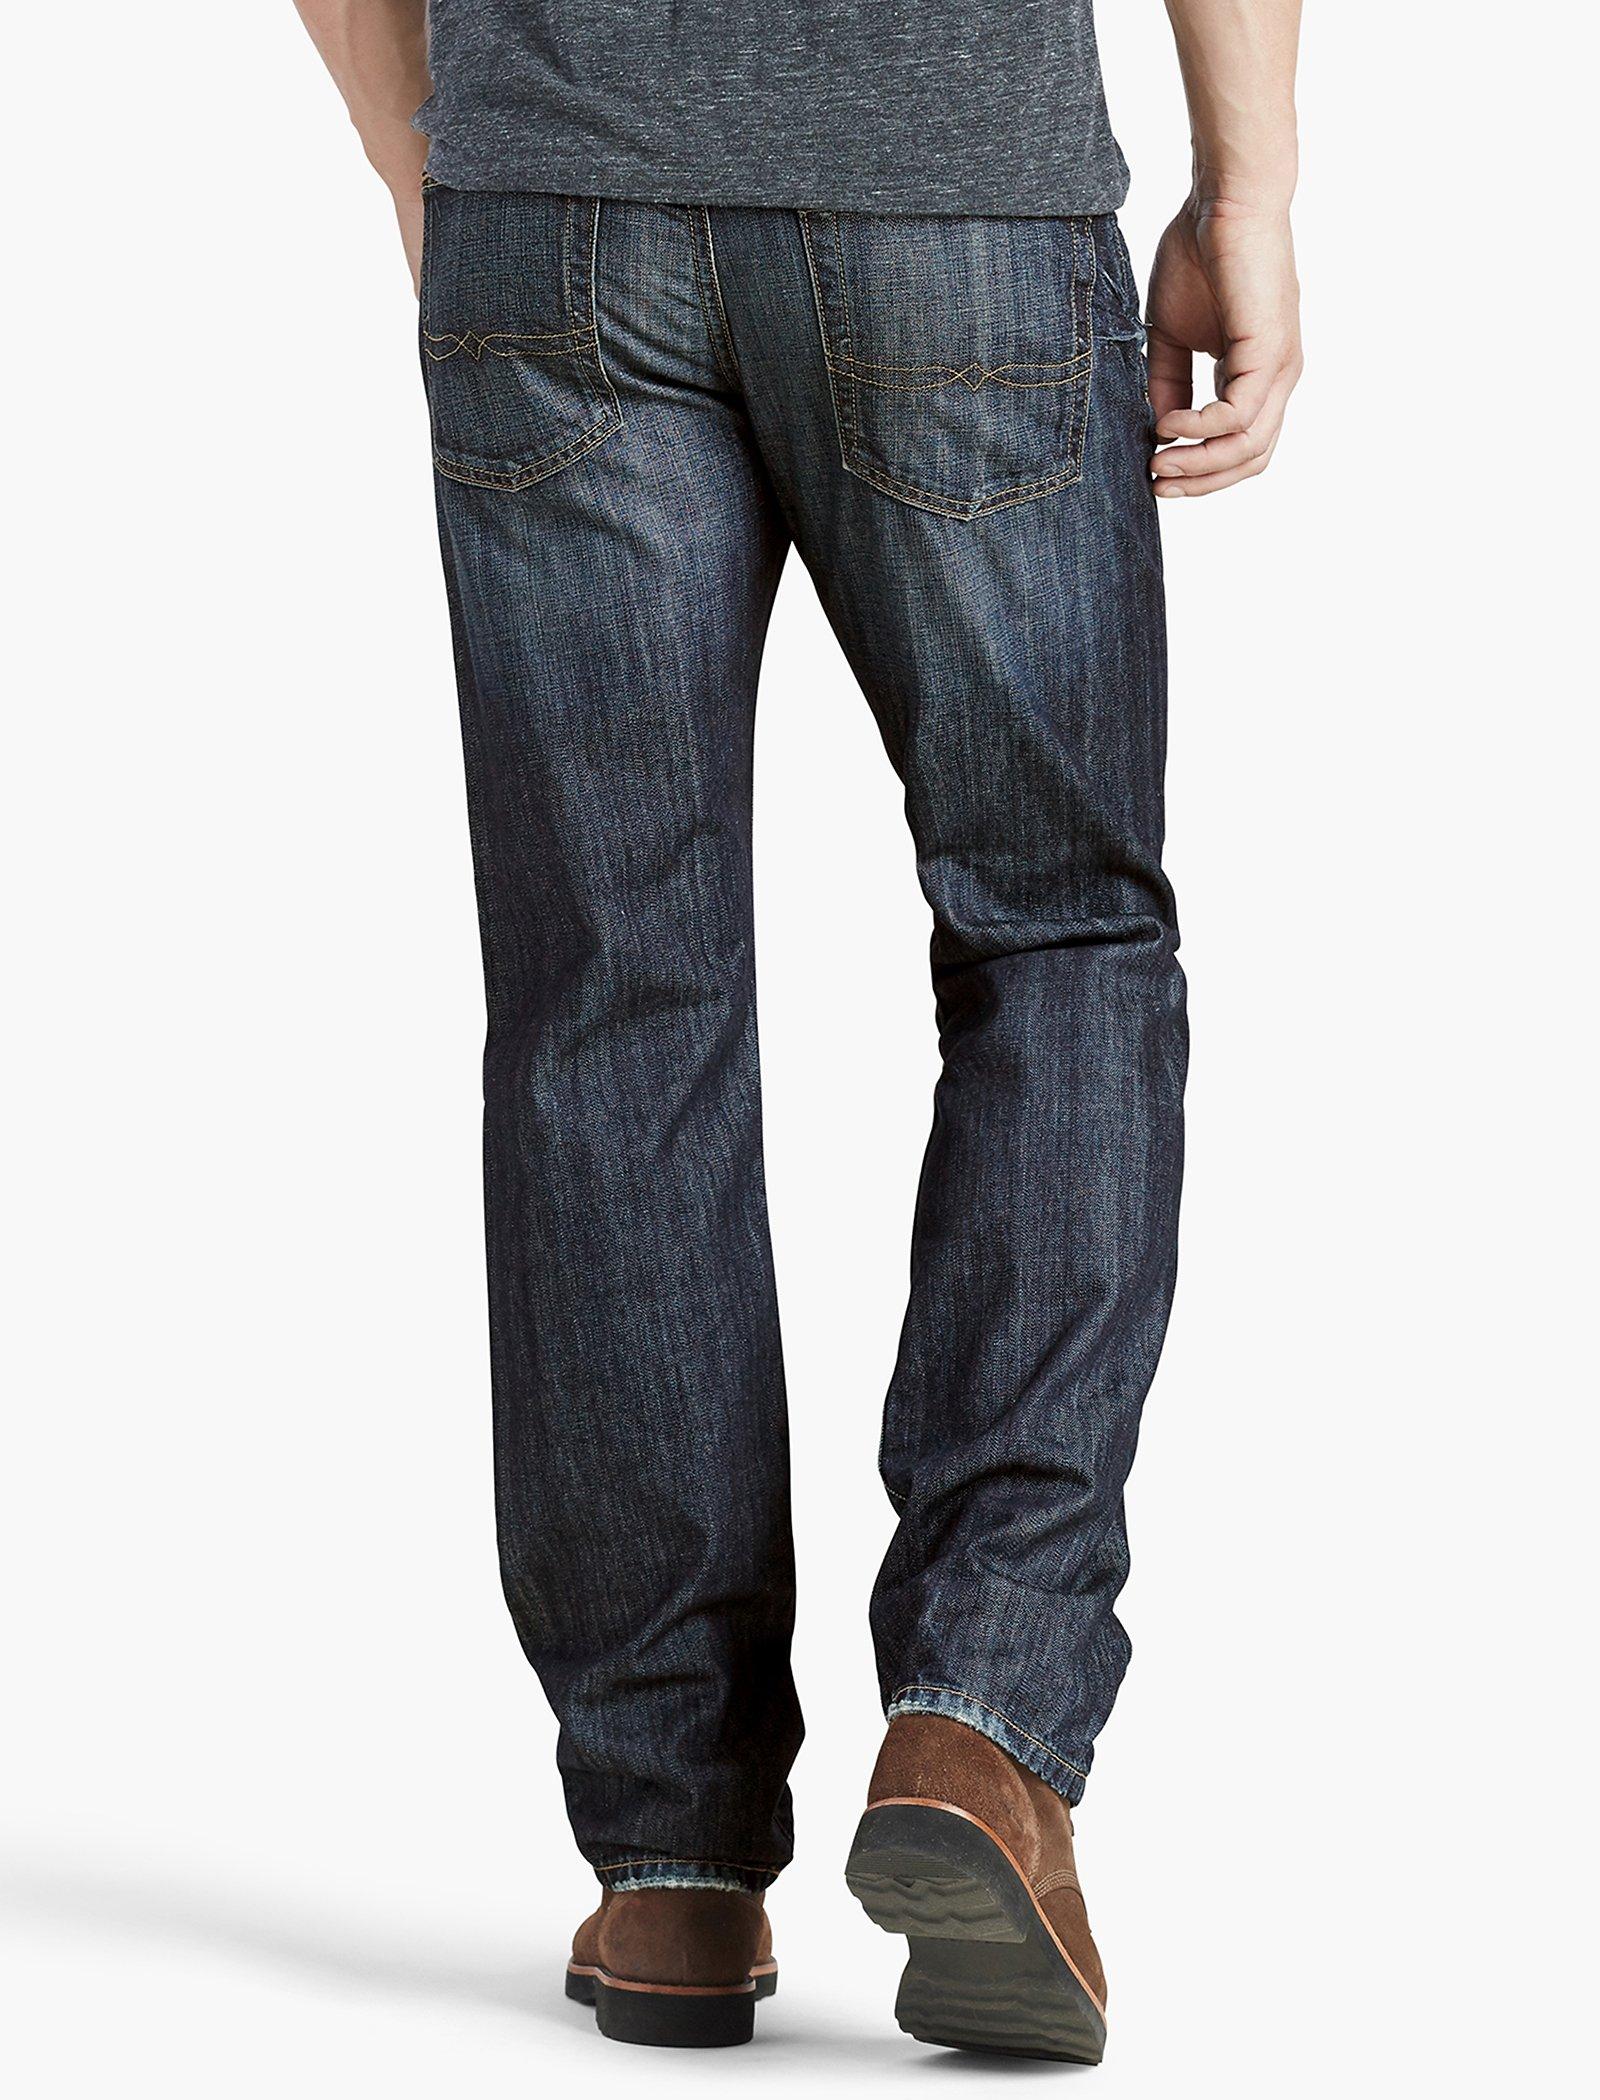 lucky 221 men's straight fit jean